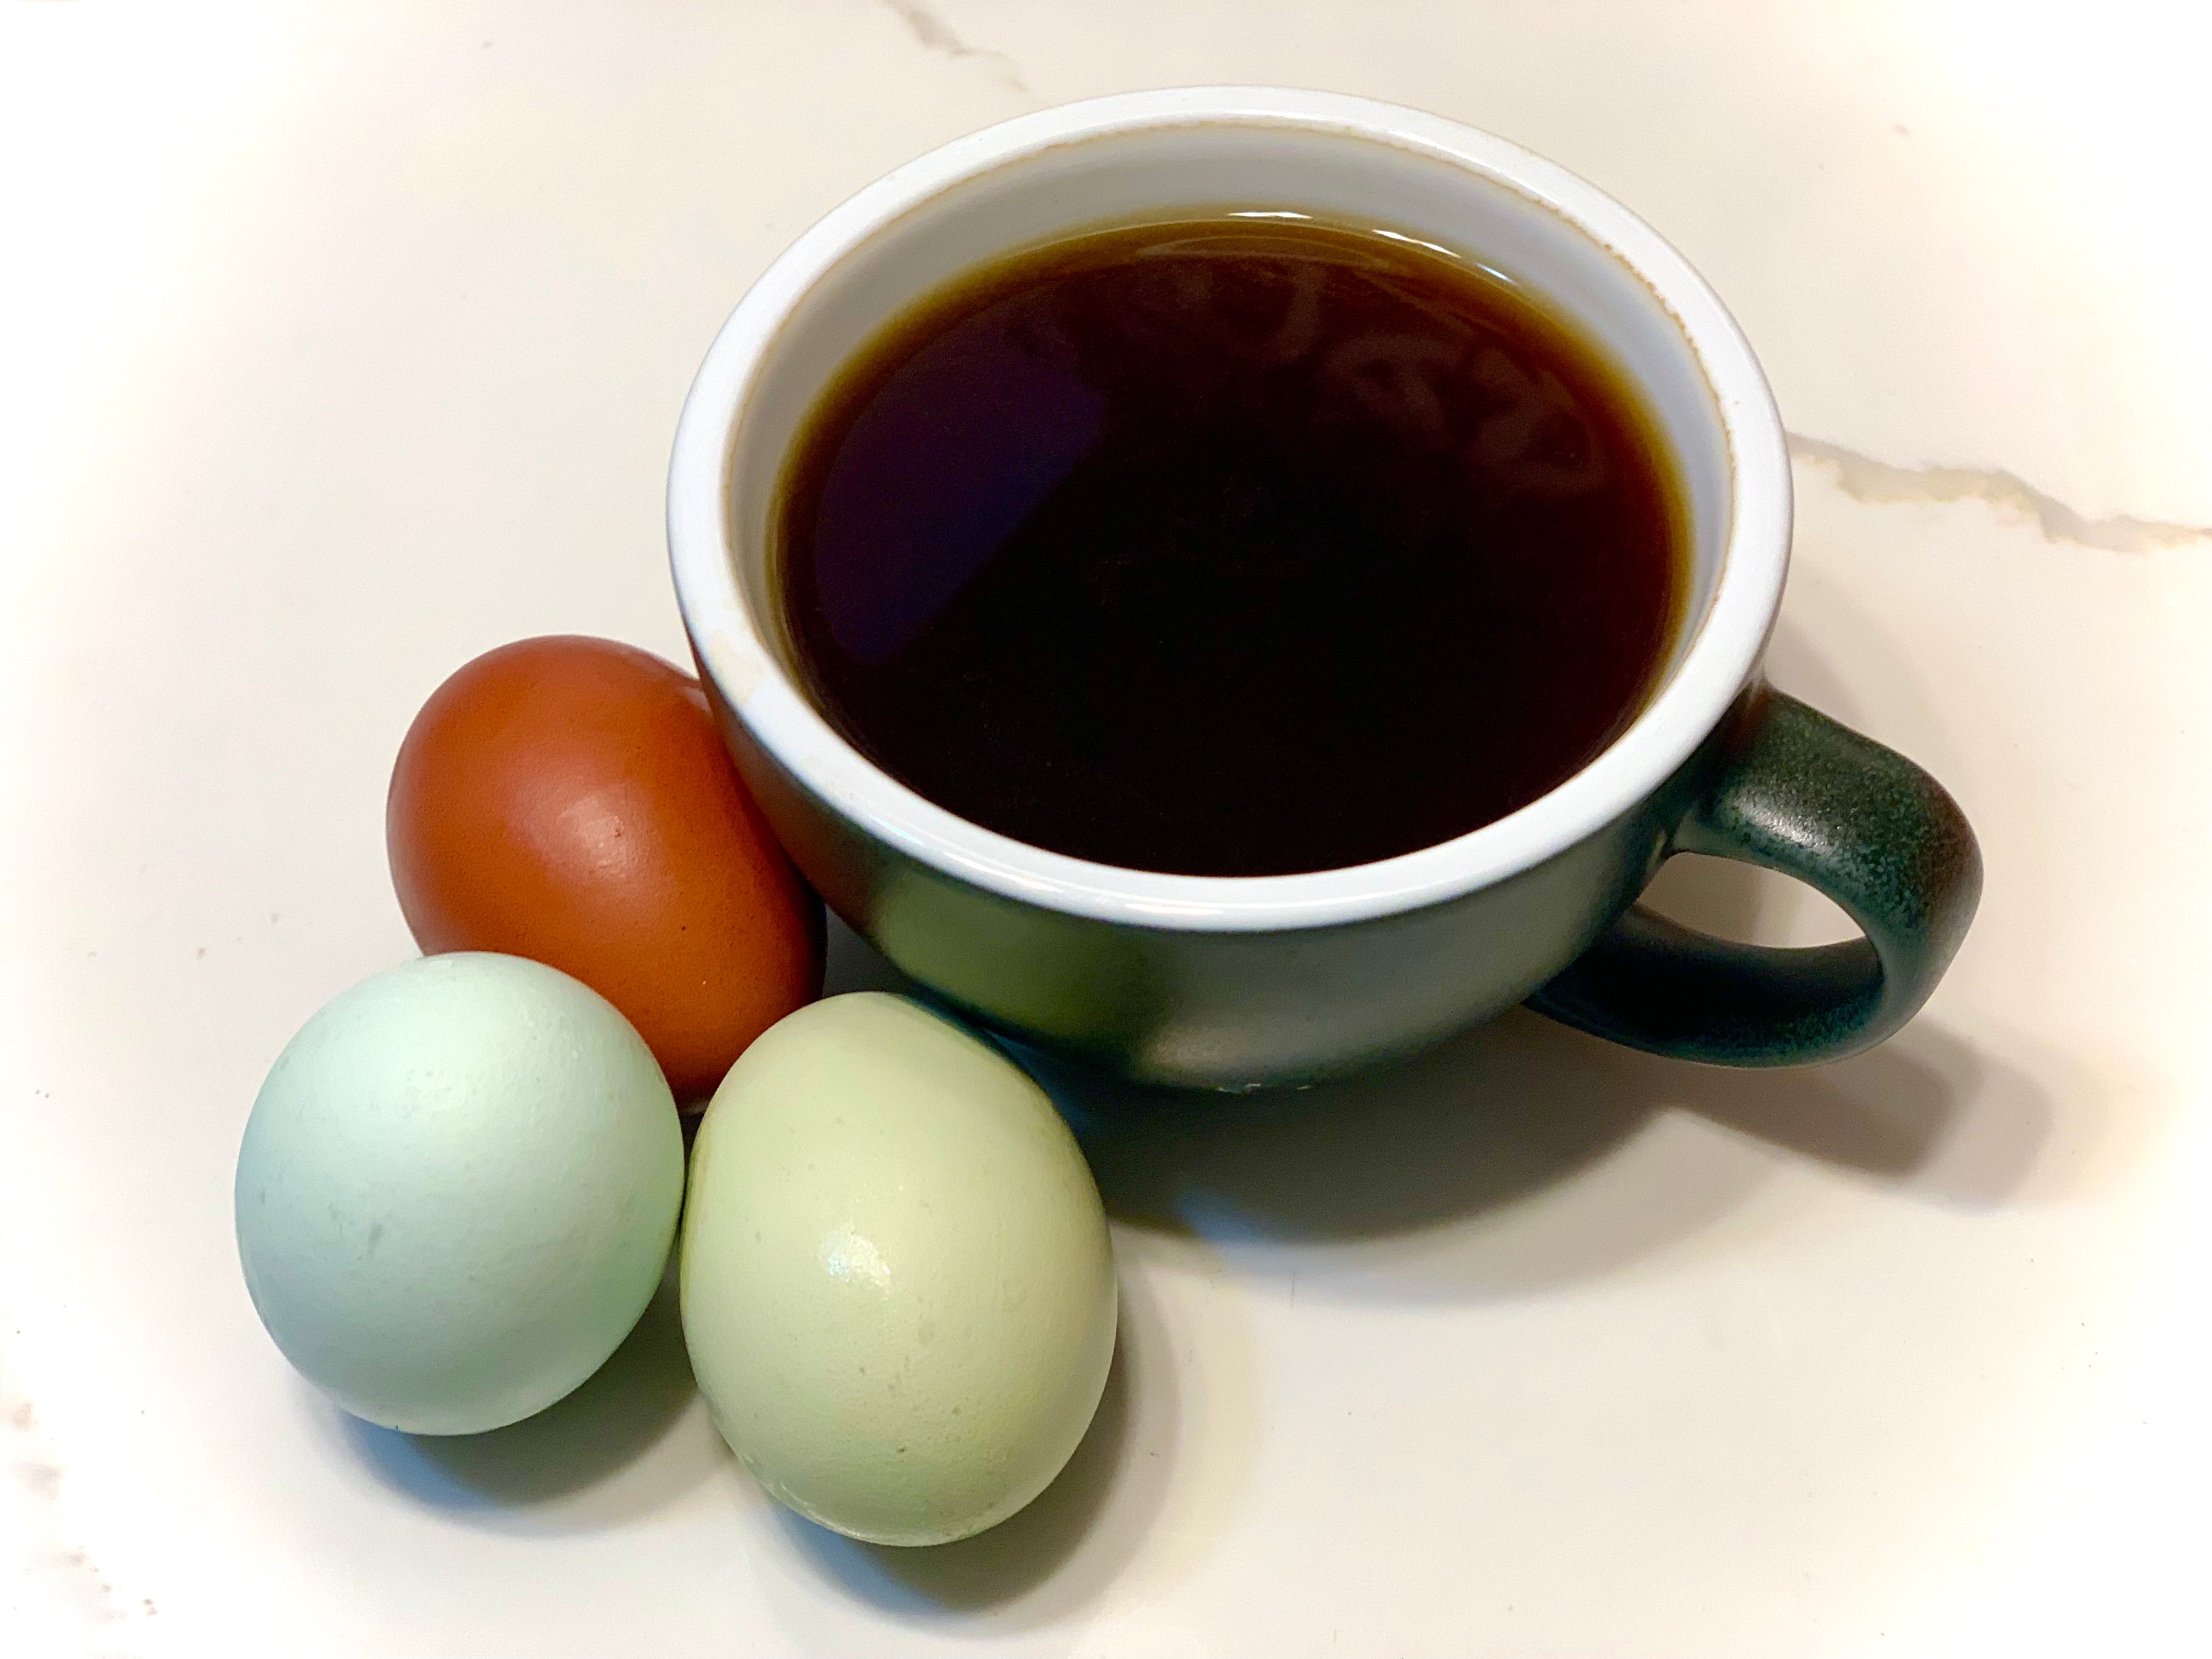 Photo of ceramic coffee cup with coffee, surrounded by four colorful eggs and coffee beans